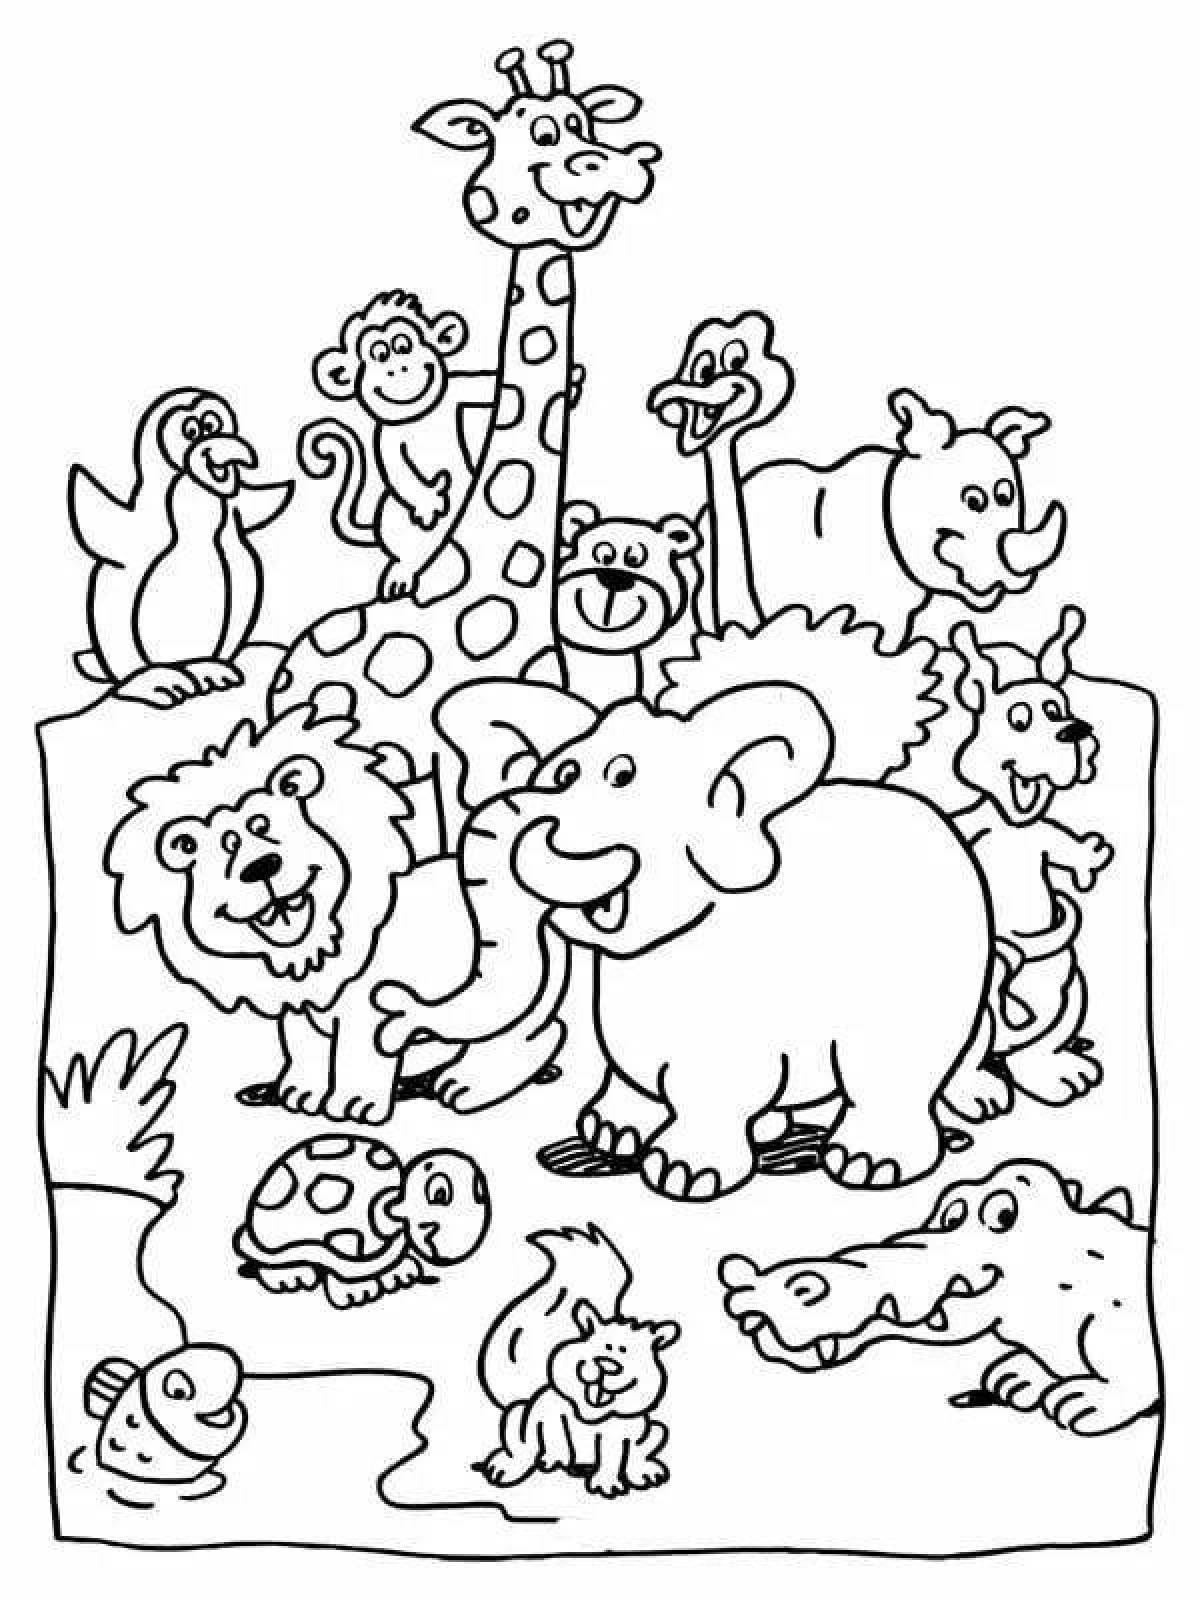 Colorful zoo animal coloring page